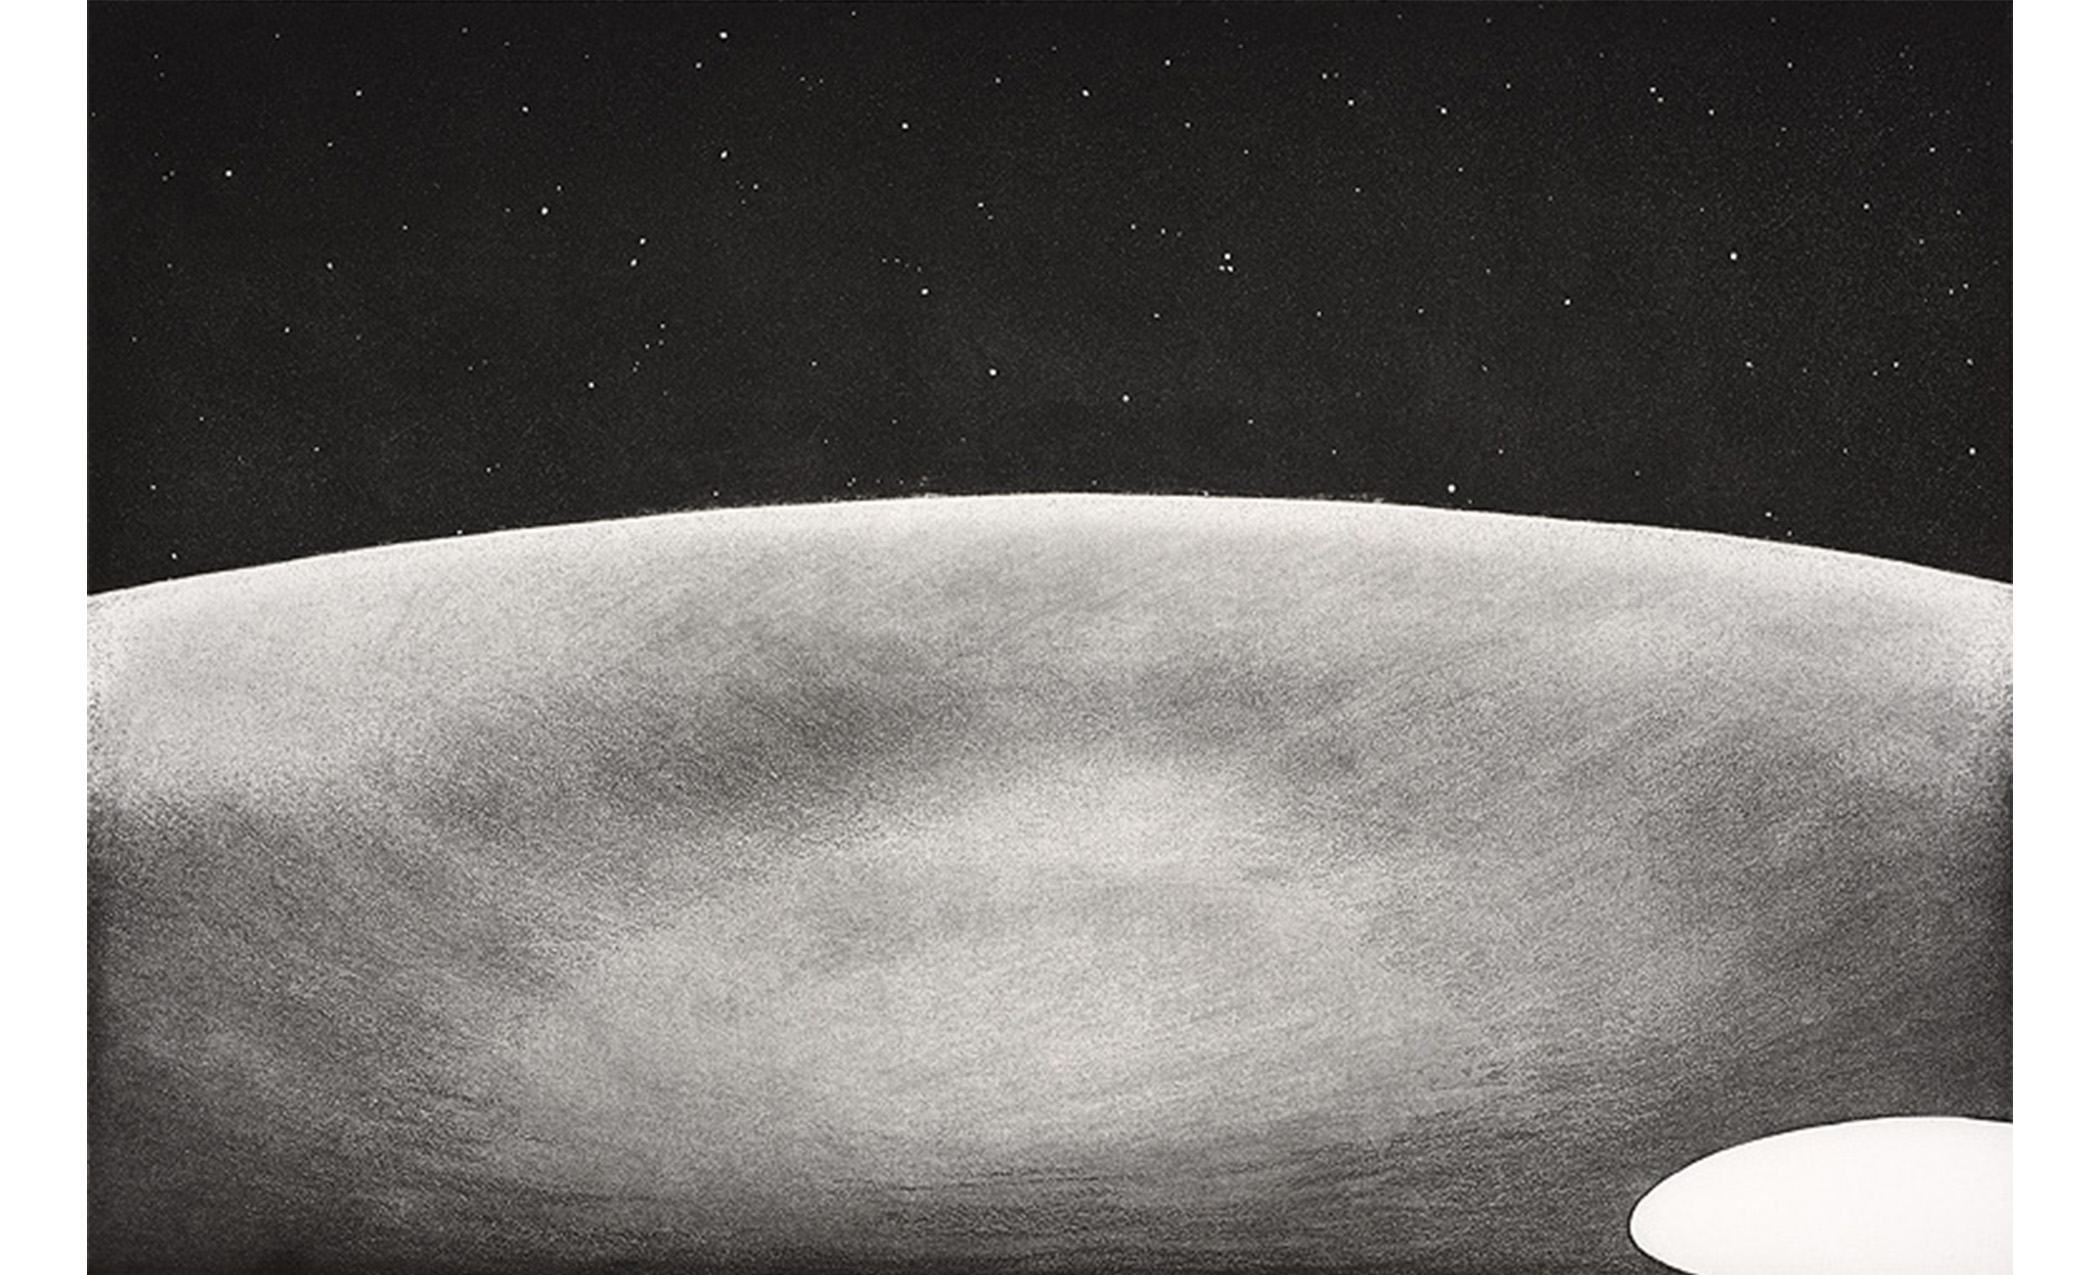 abstract. large gray semicircle extending from the bottom of the image. top of the image is a dark sky with stars. small white circle in the bottom right corner.